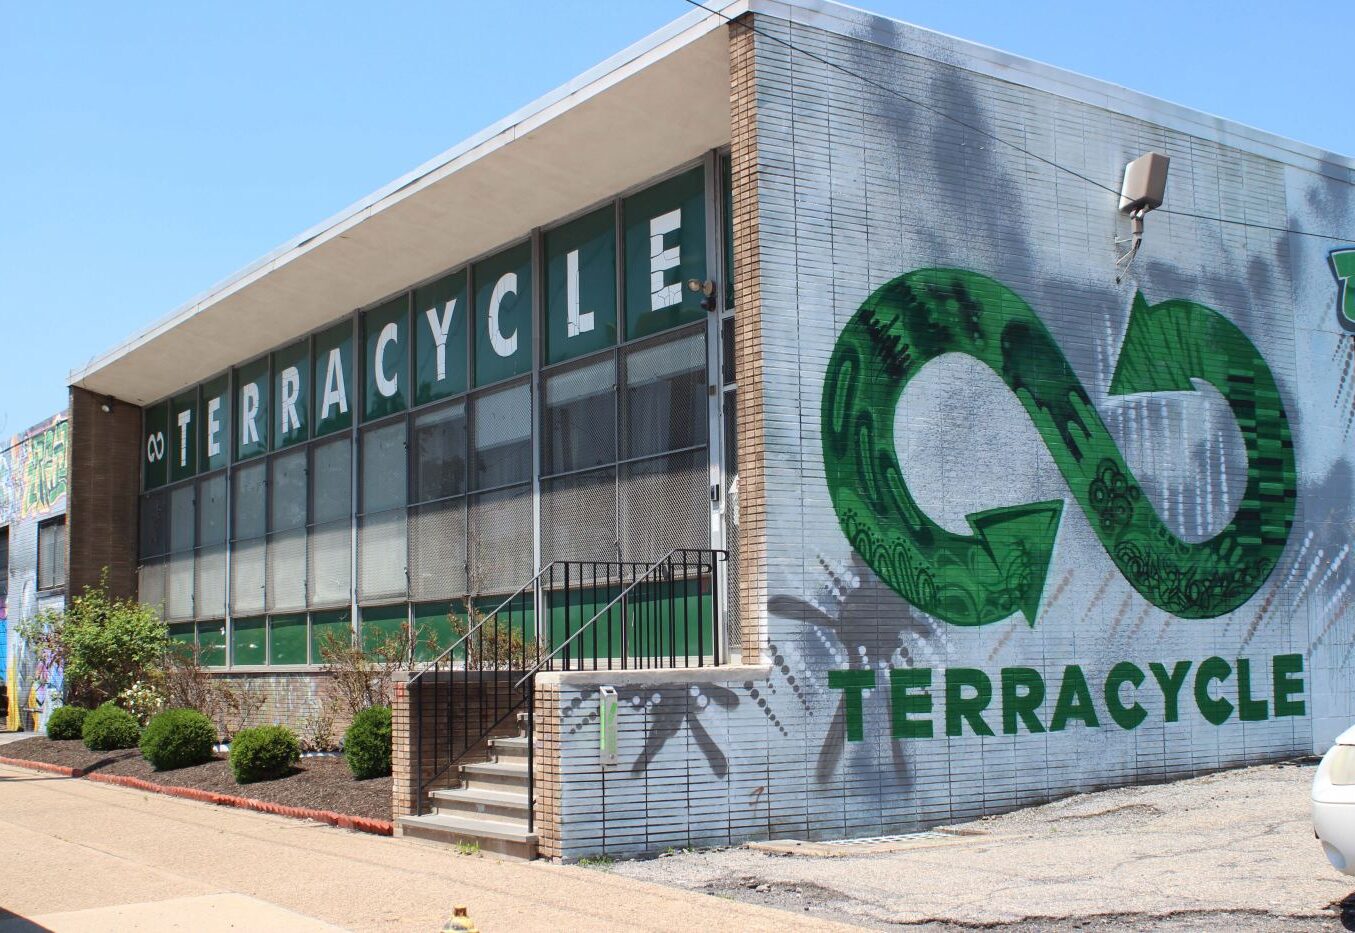 TerraCycle Champions the Circular Economy on Global Recycling Day